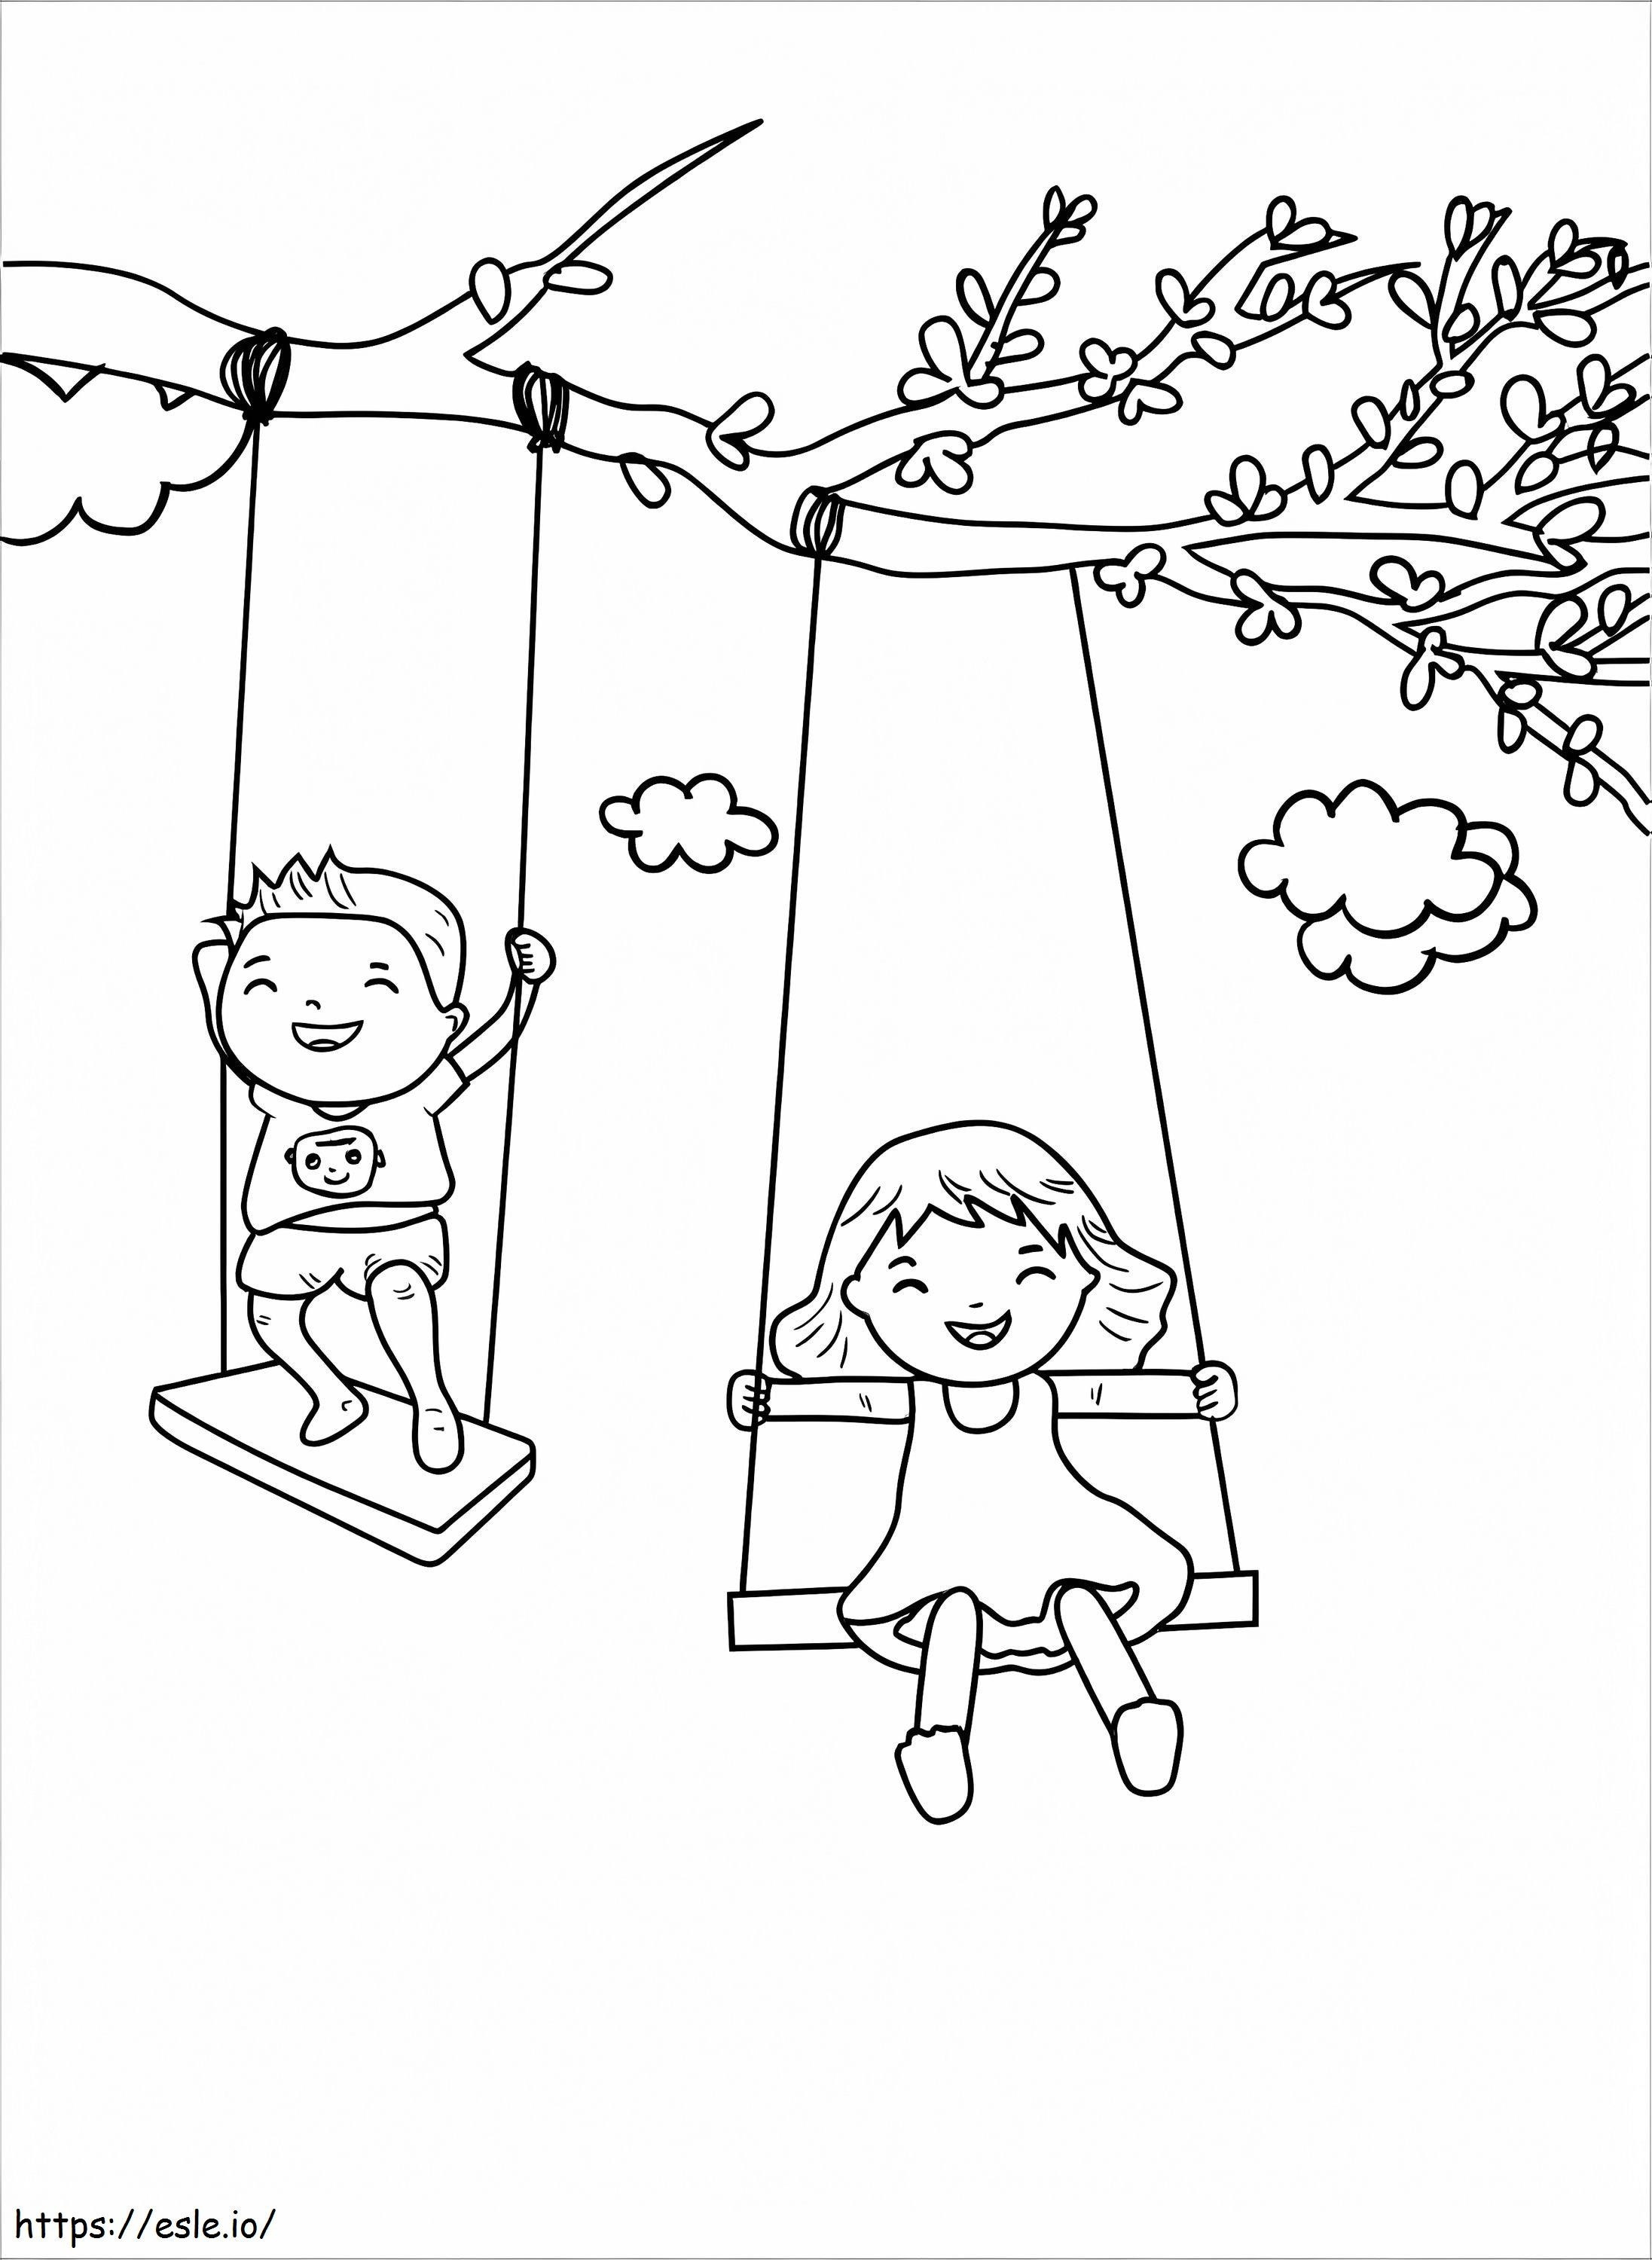 Kids on swing coloring page